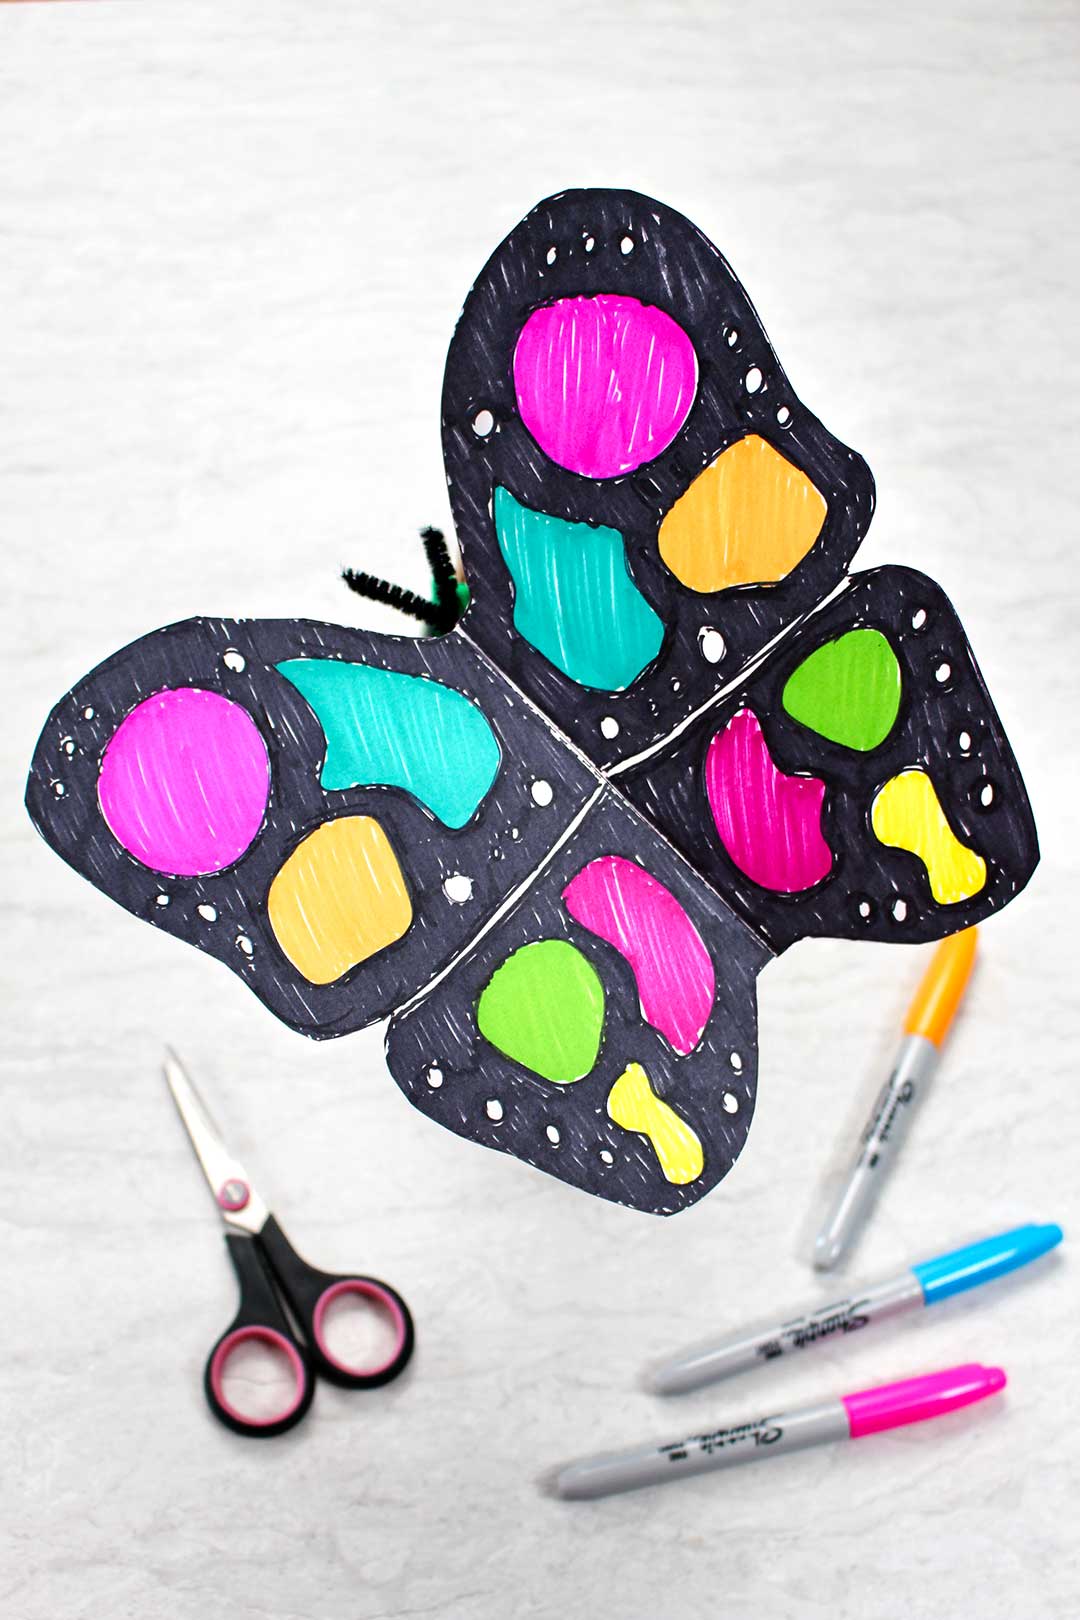 Completed paper butterfly craft colored with black and neon sharpie makers resting near a black pair of scissors and neon sharpie markers.